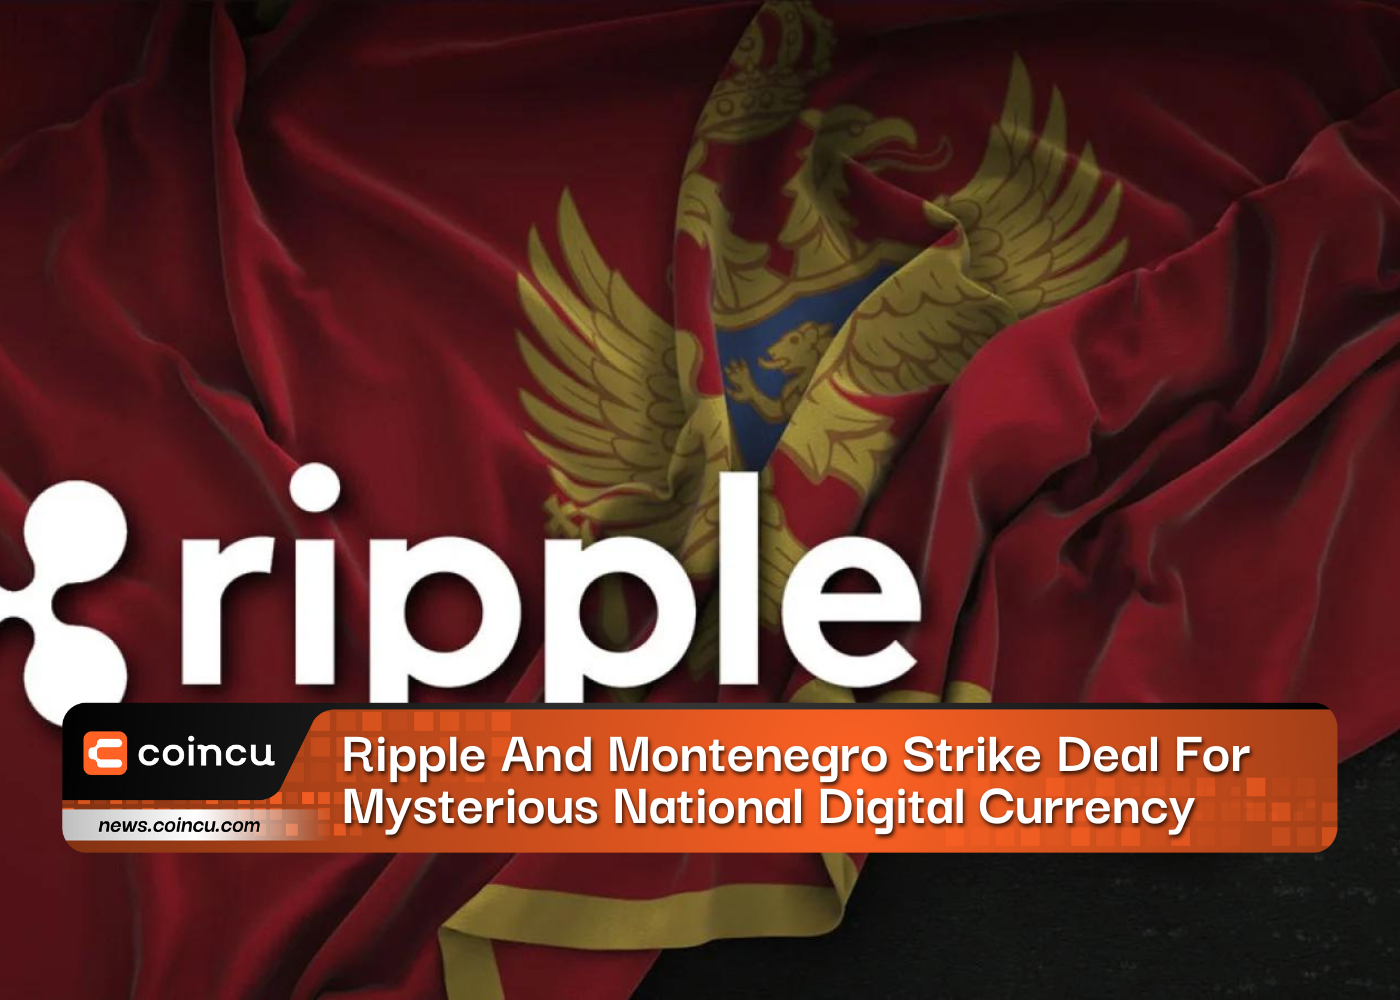 Ripple And Montenegro Strike Deal For